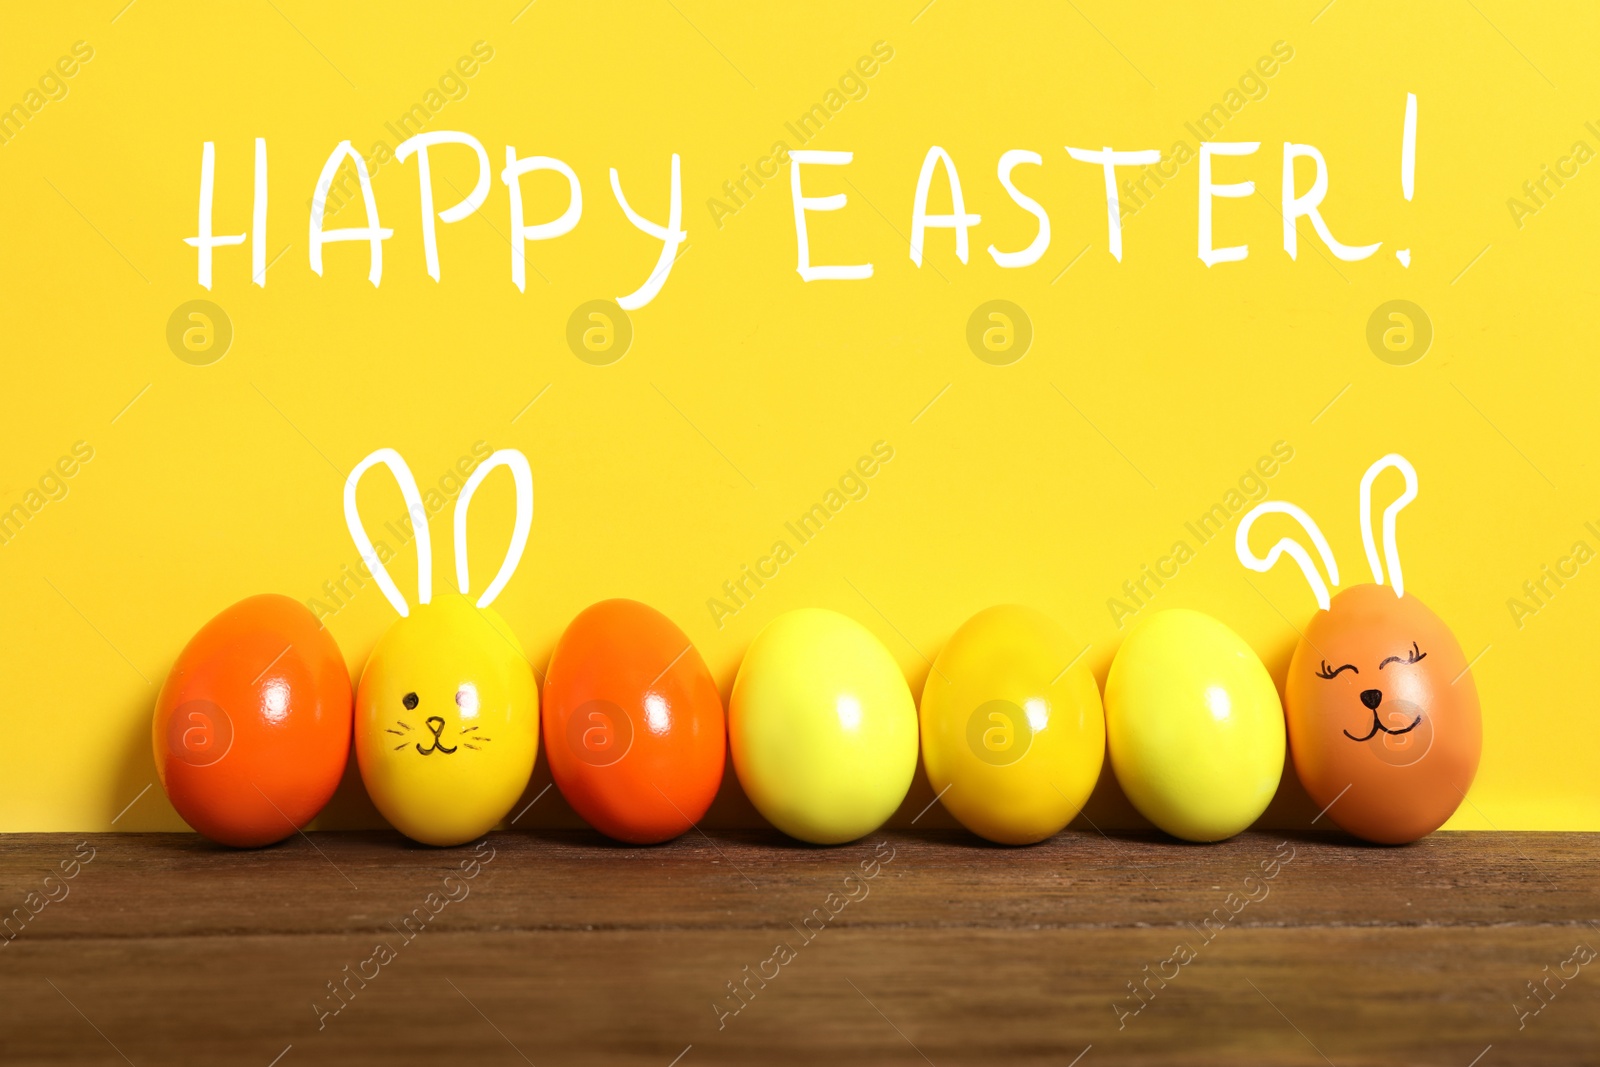 Image of Two eggs with drawn faces and ears as Easter bunnies among others on wooden table against yellow background